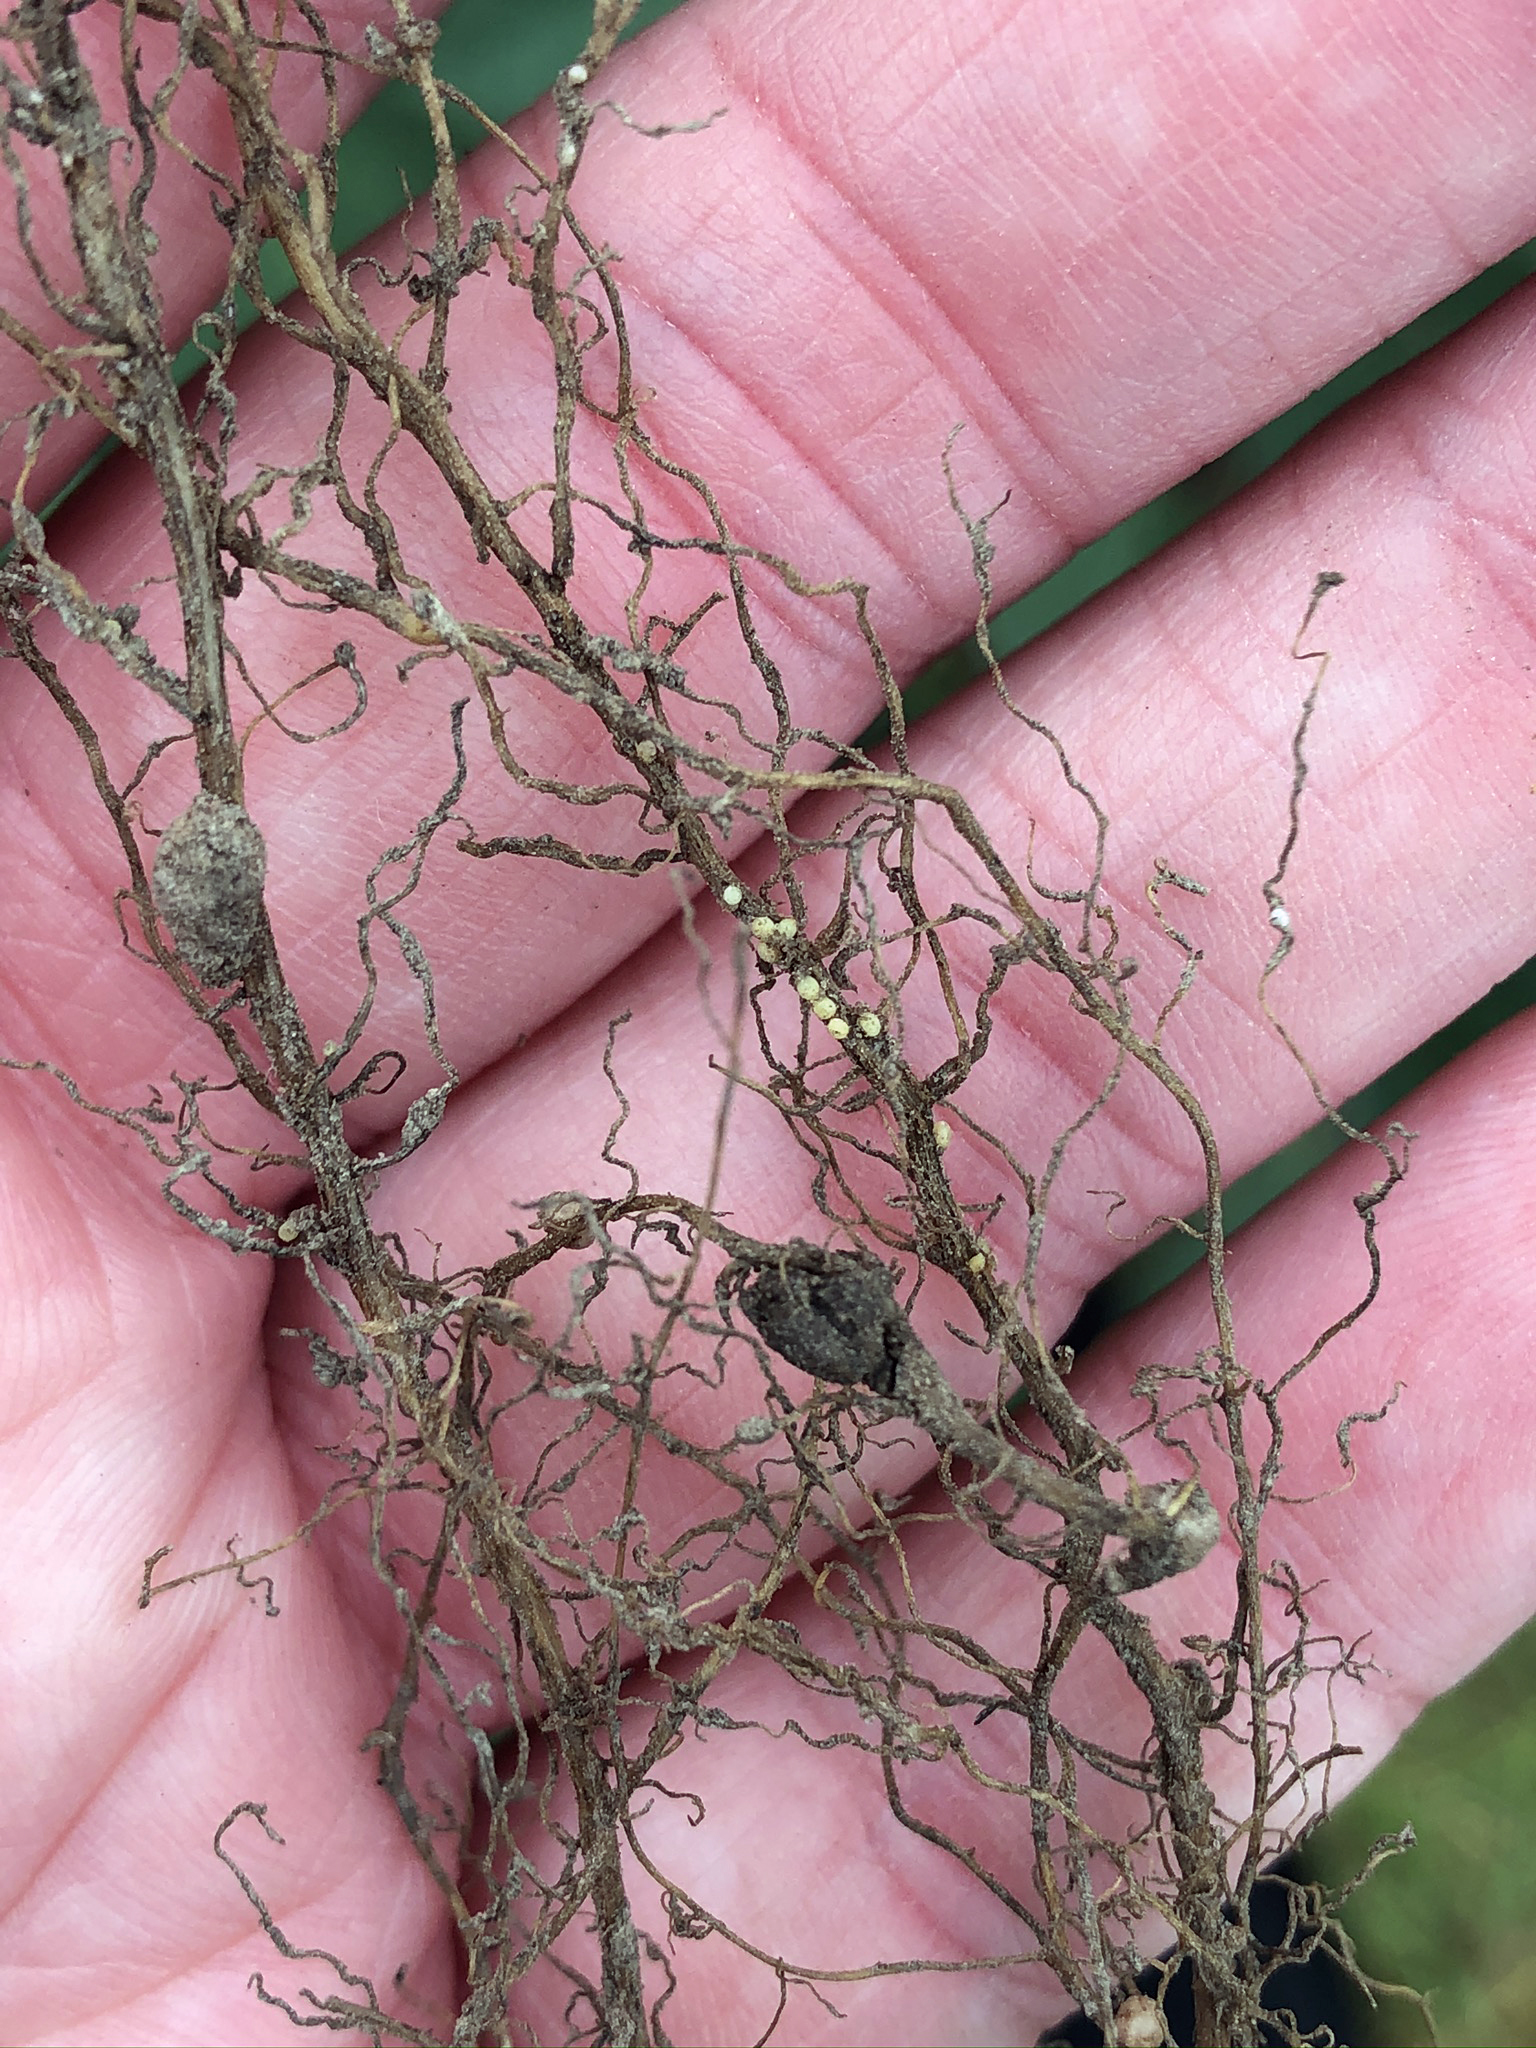 Open Soybean cyst nematode on roots of a soybean plant. Photo by Kaitlyn Bissonnette.